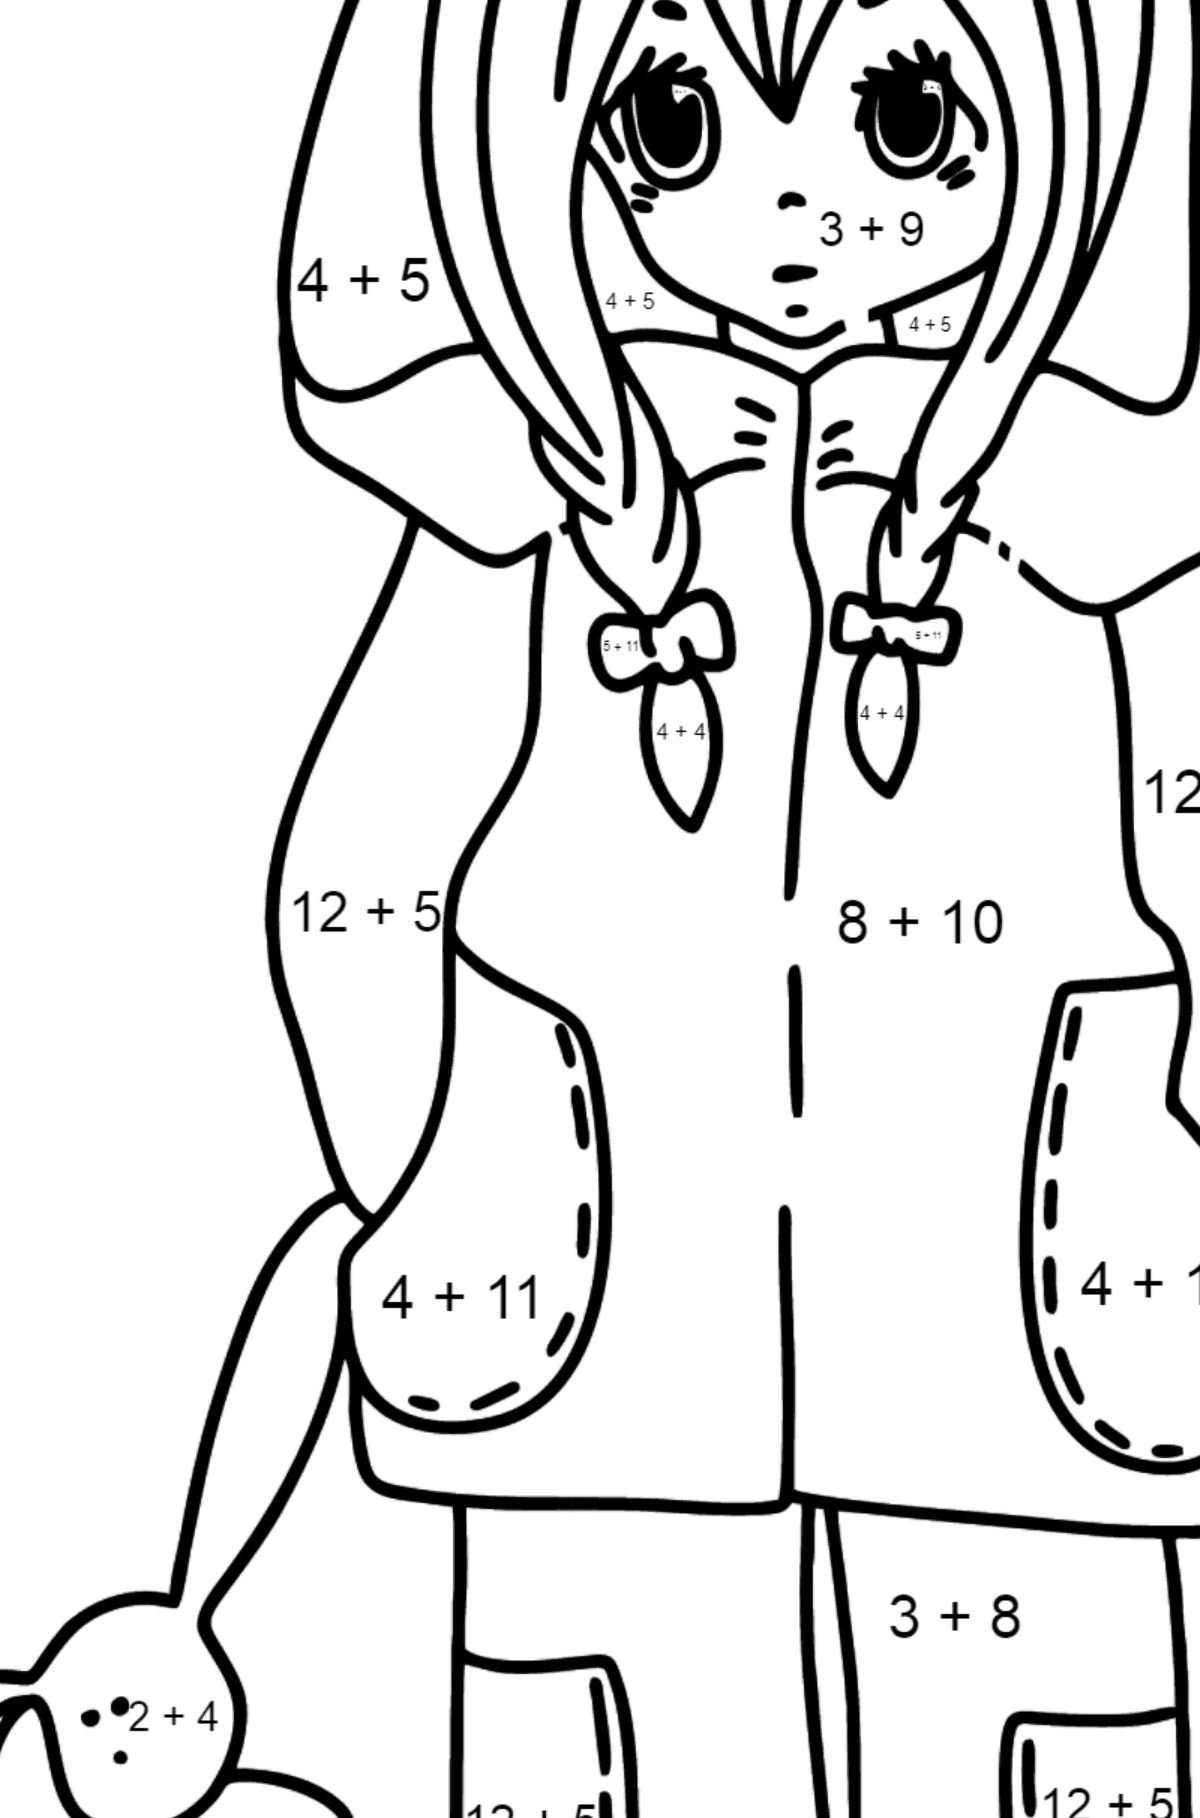 Anime girl with pigtails coloring page - Math Coloring - Addition for Kids